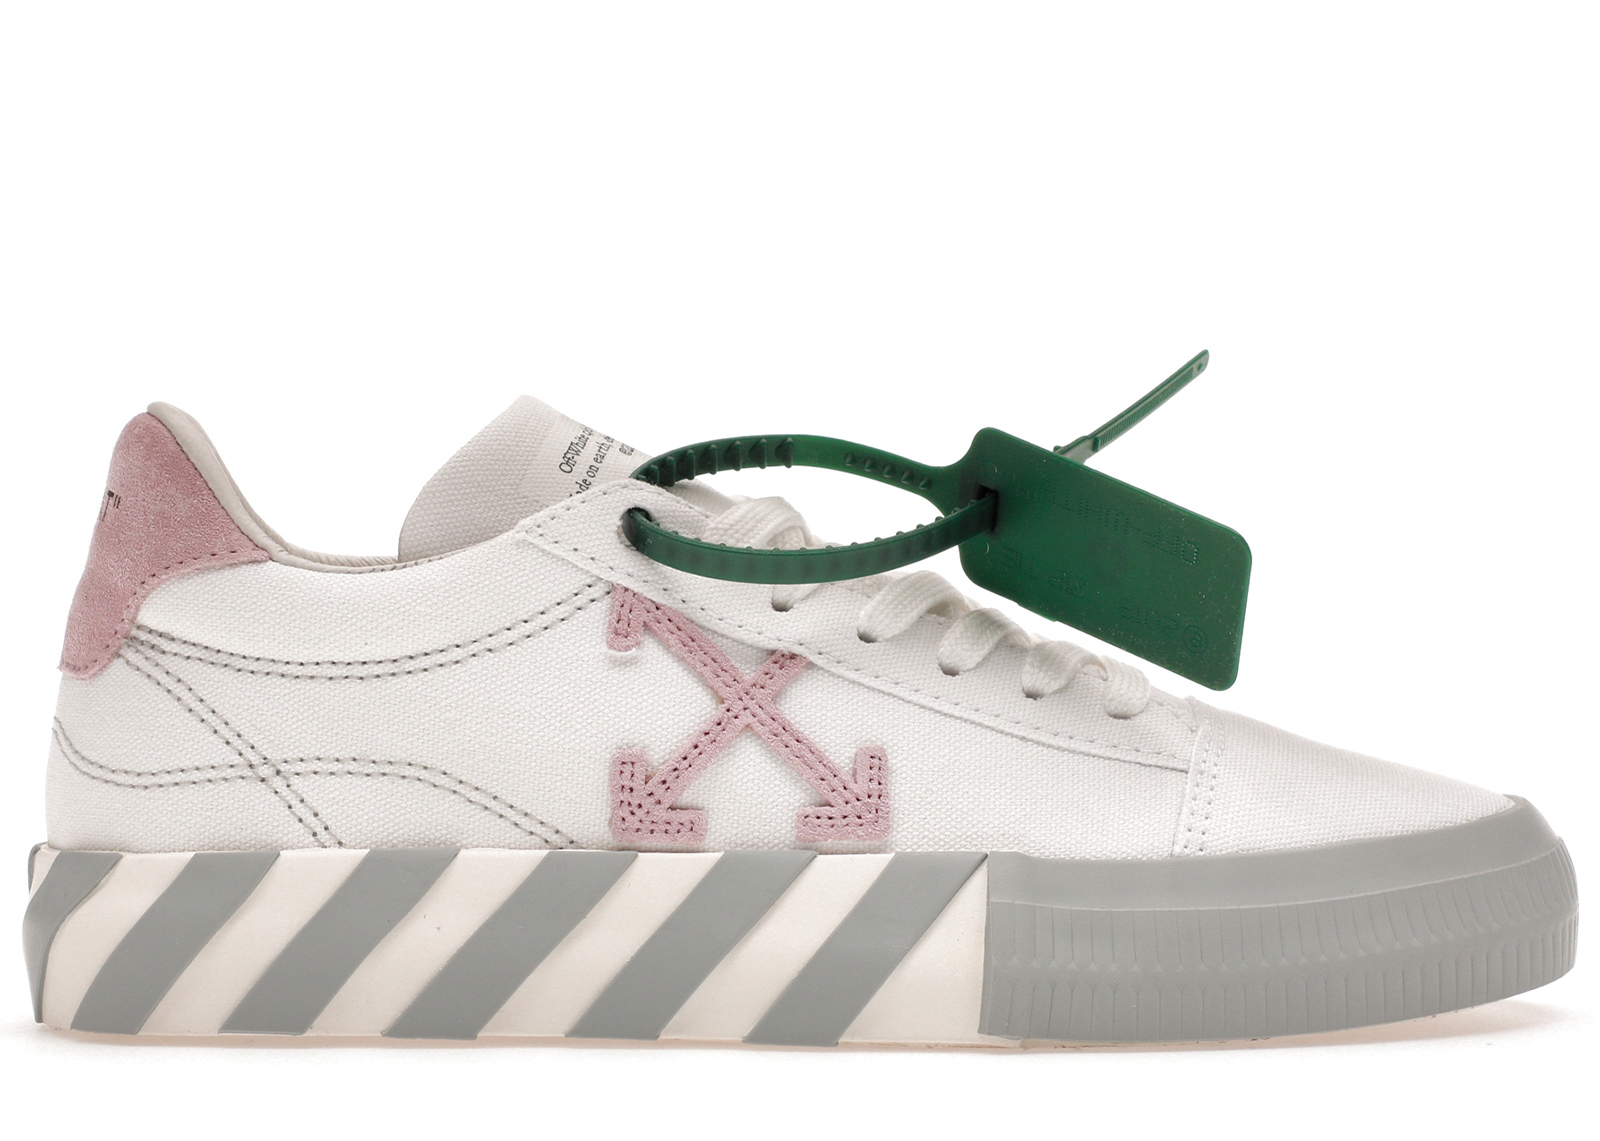 OFF-WHITE Vulc Low Canvas White Light Pink Grey